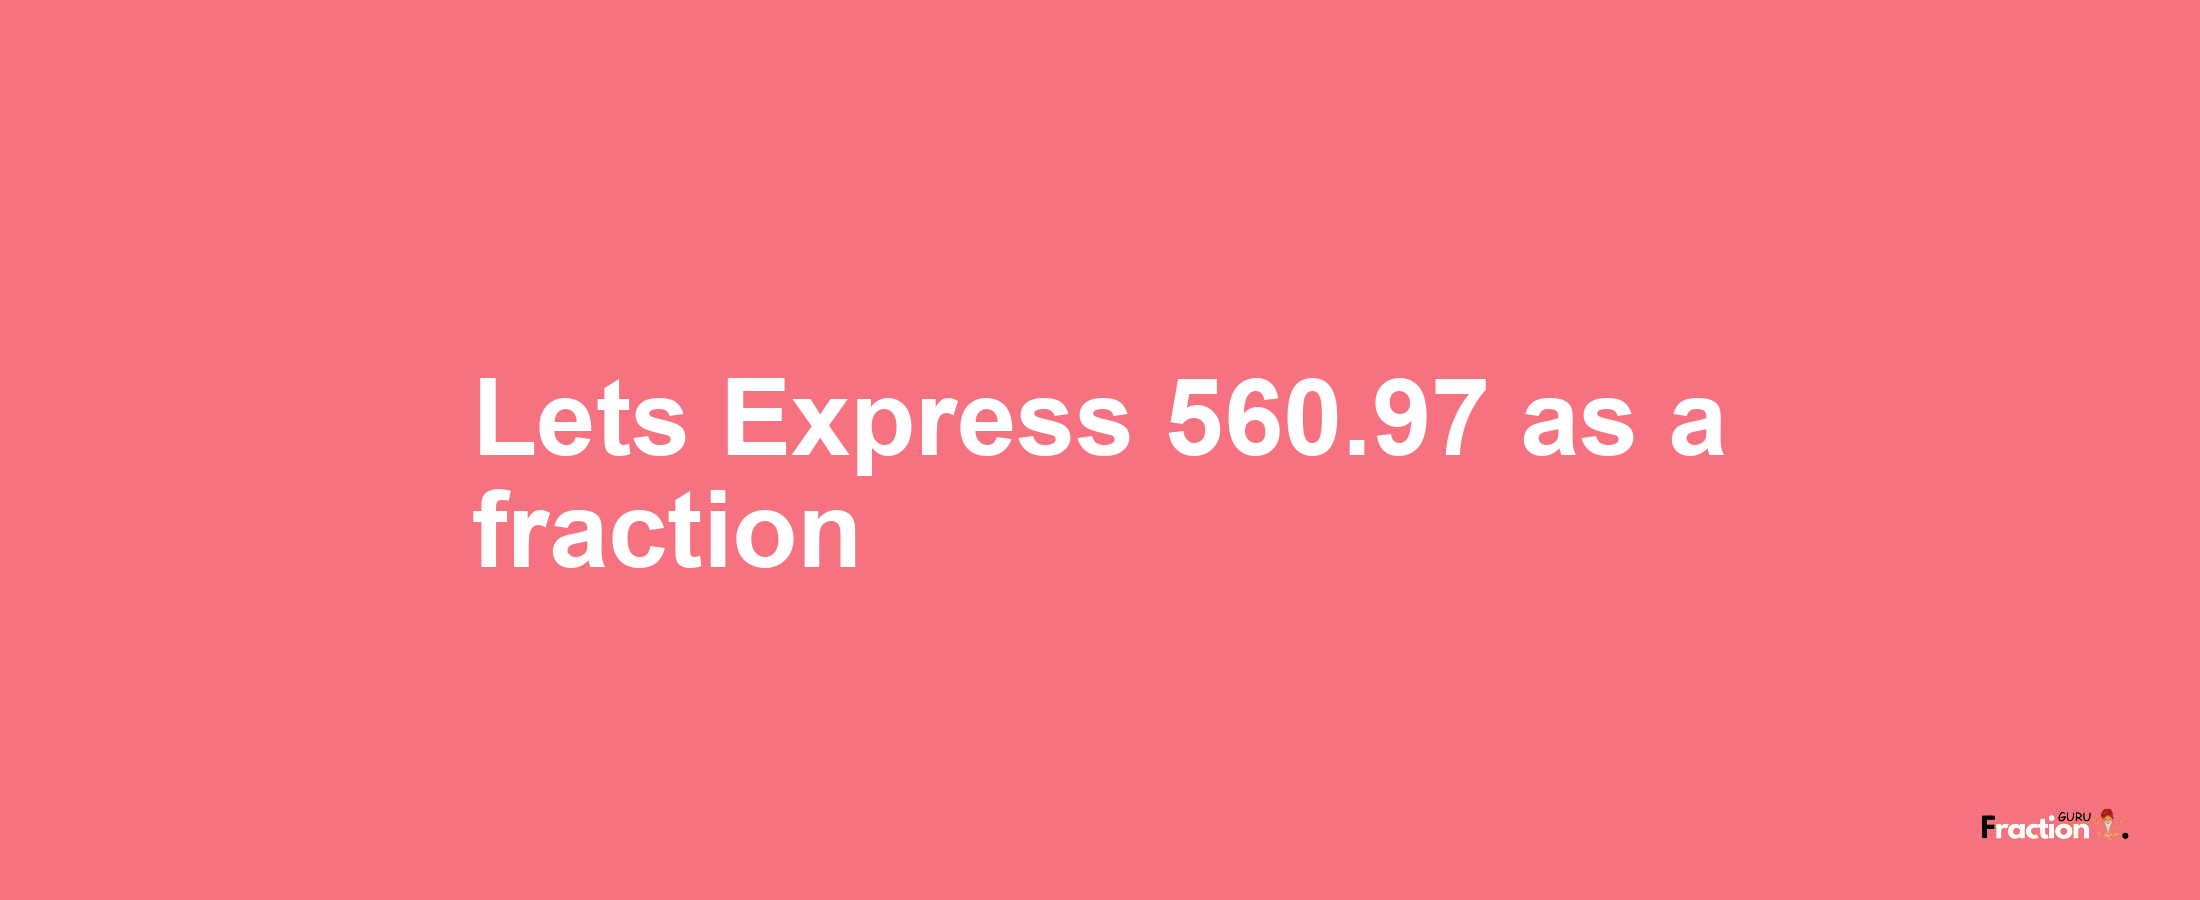 Lets Express 560.97 as afraction